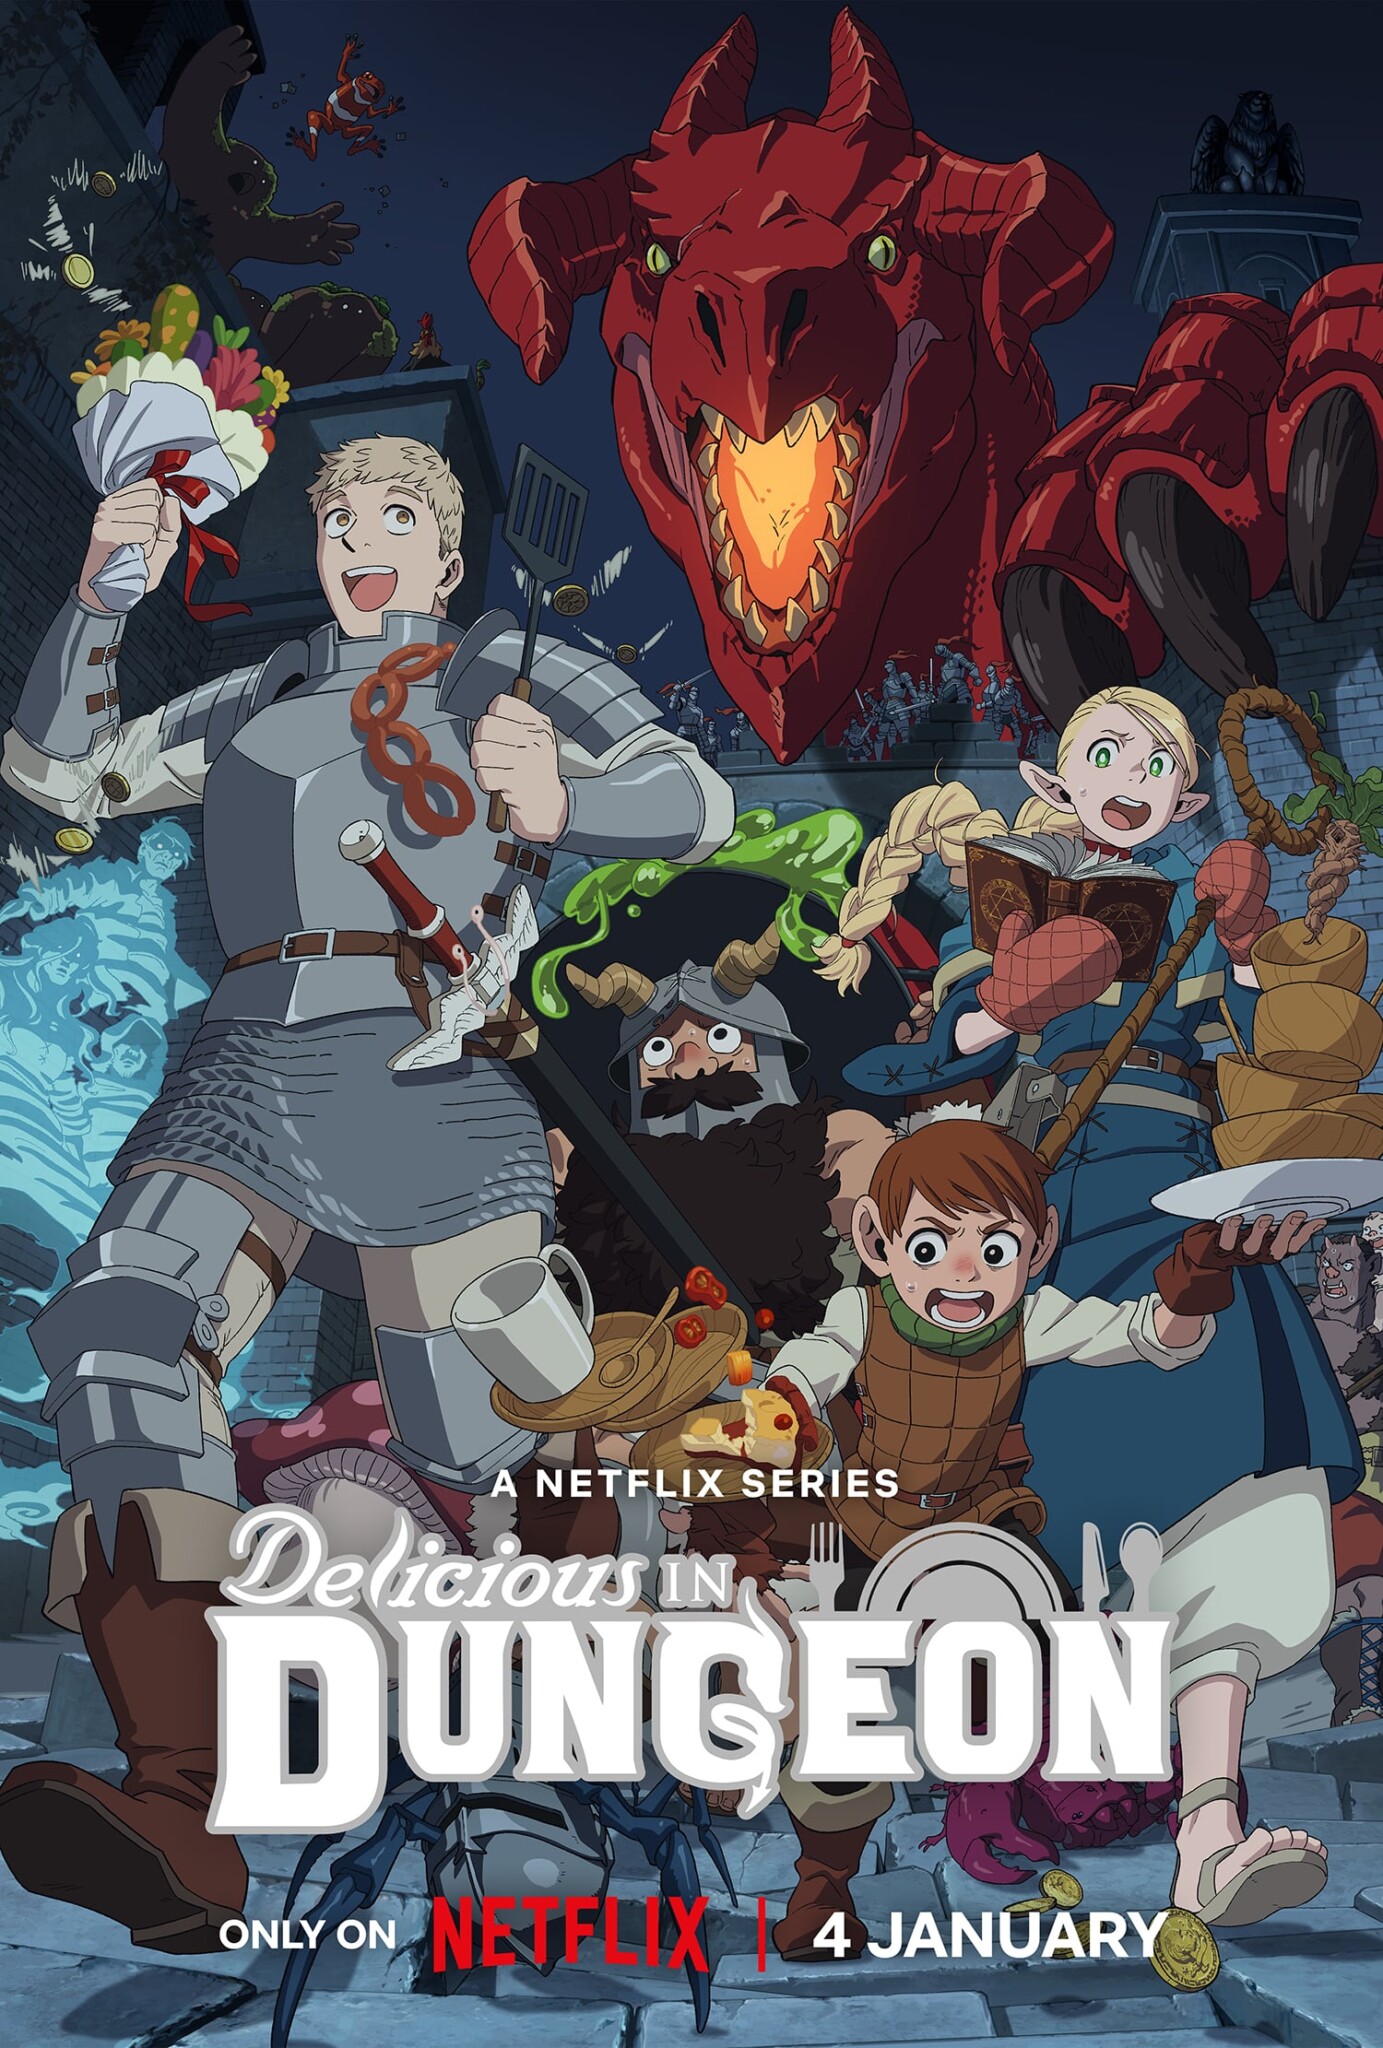 Poster of anime "Delicious in Dungeon." The illustration depicts four adventurers running from a red dragon.